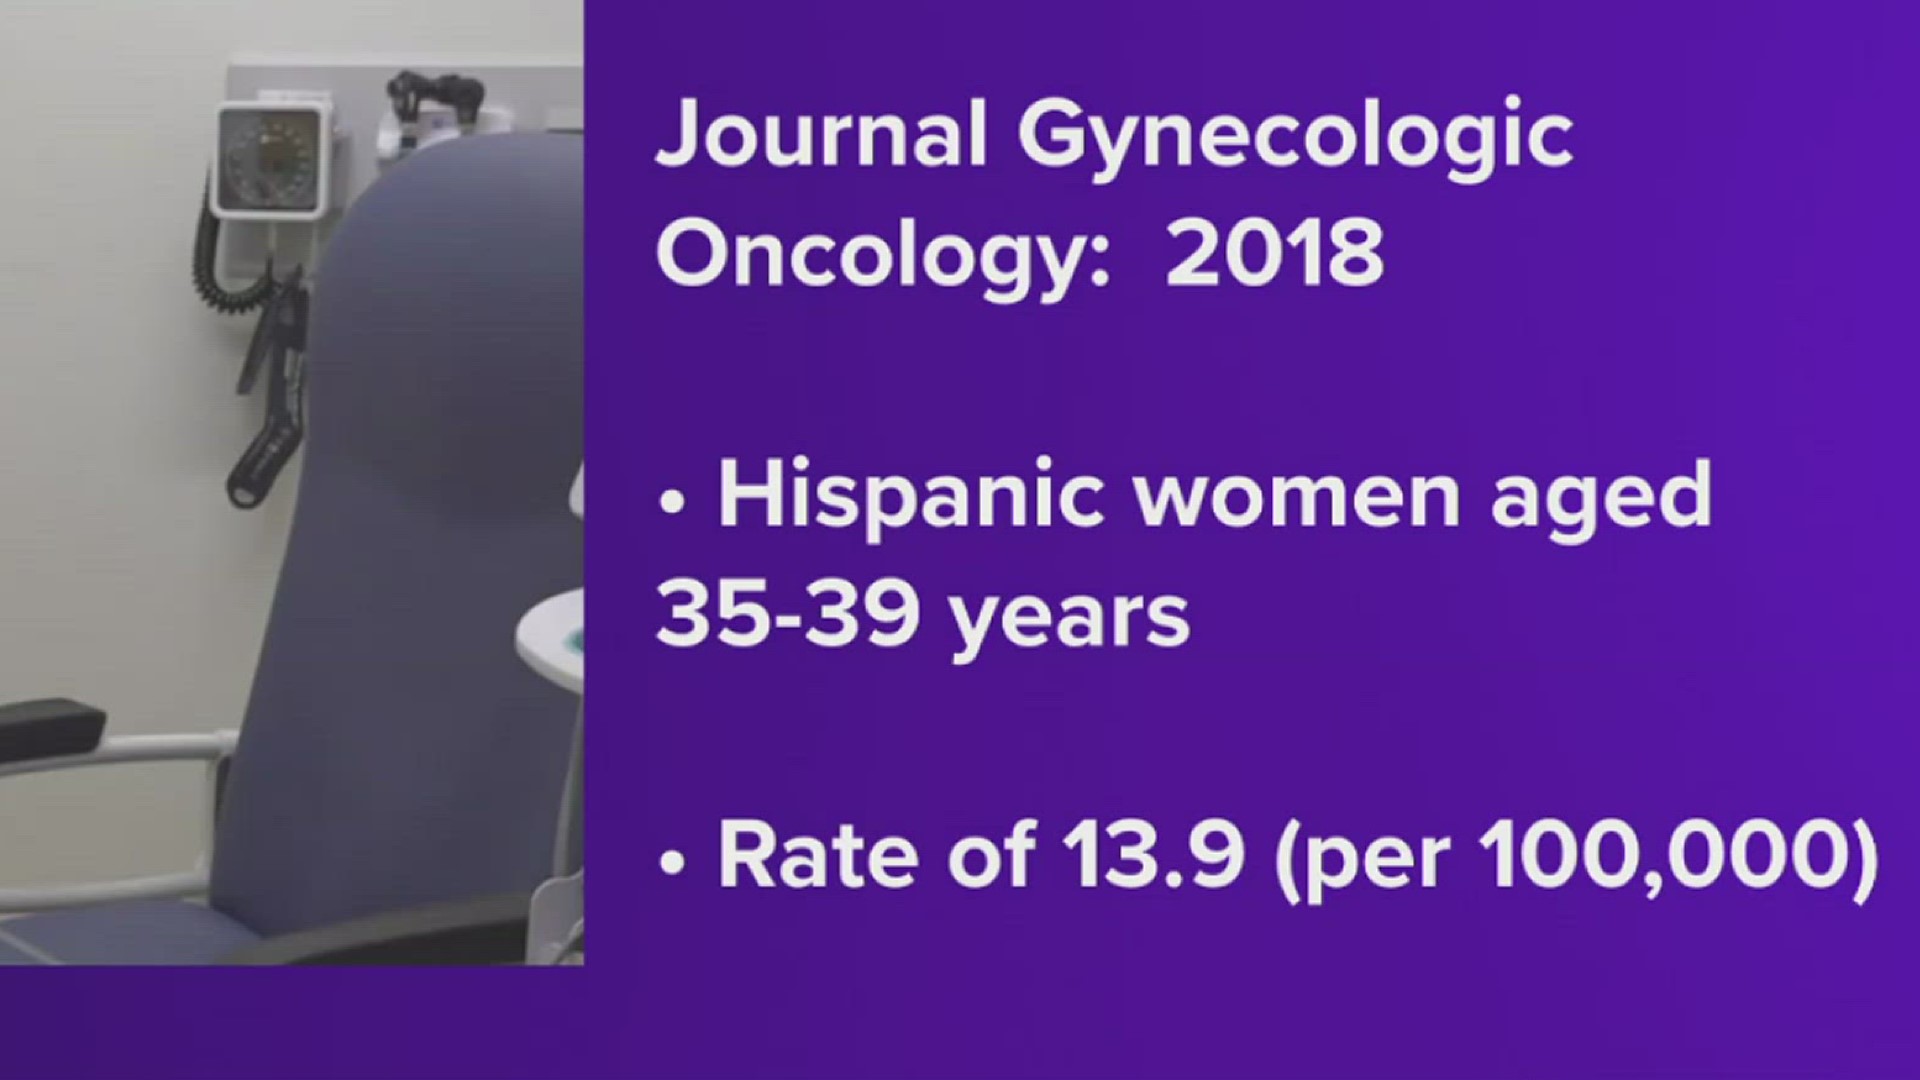 Dr. Christine Canterbury, with Corpus Christi Medical Center said that uterine cancer does have clear indicators that women should look out for.